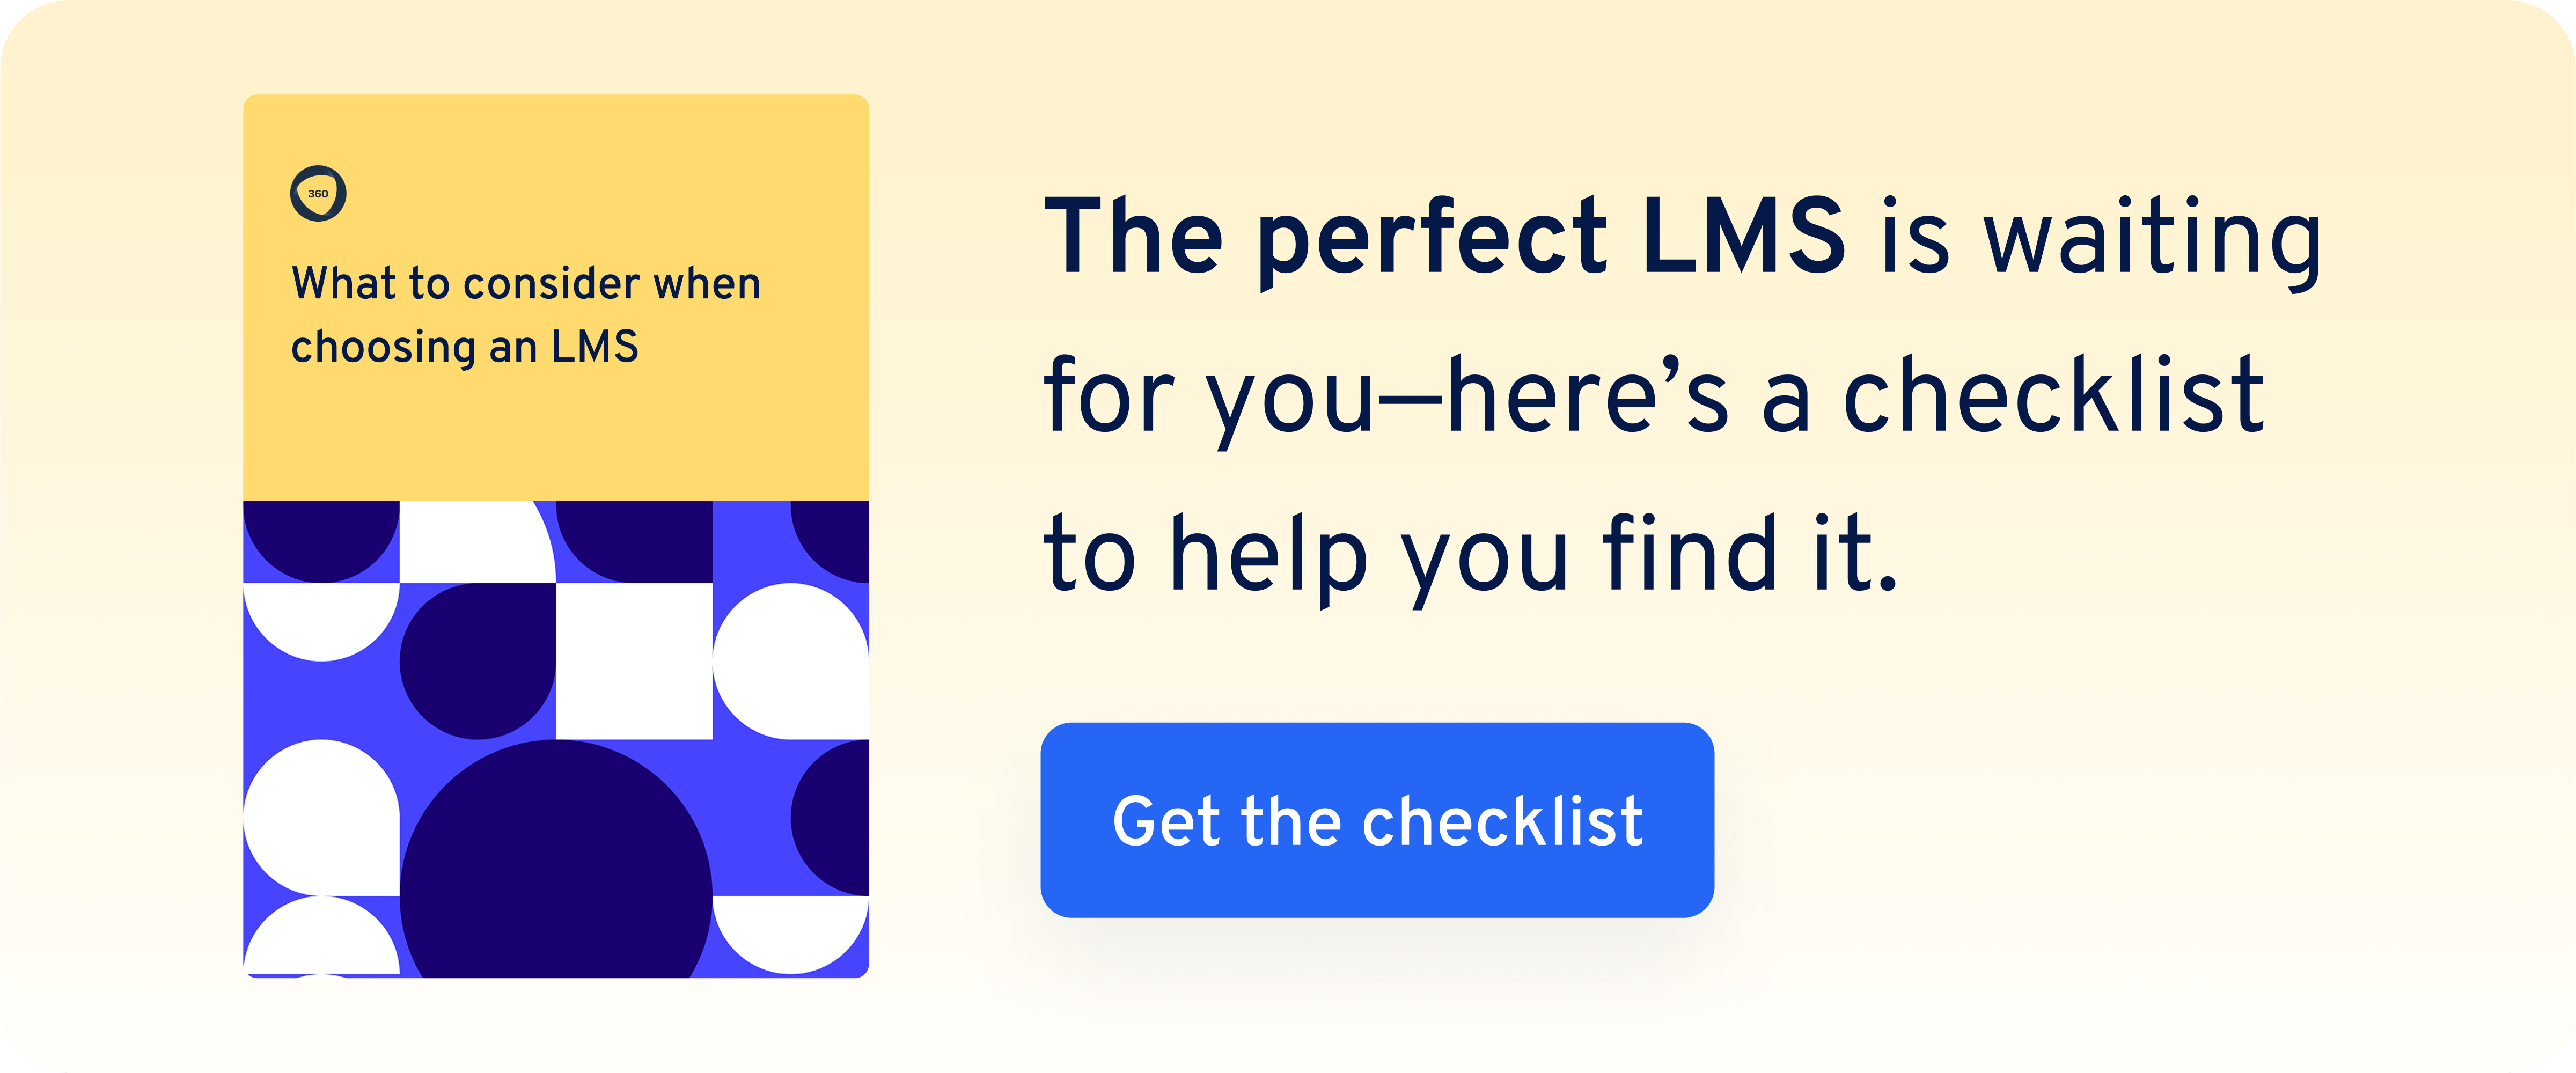 What to consider when choosing an LMS